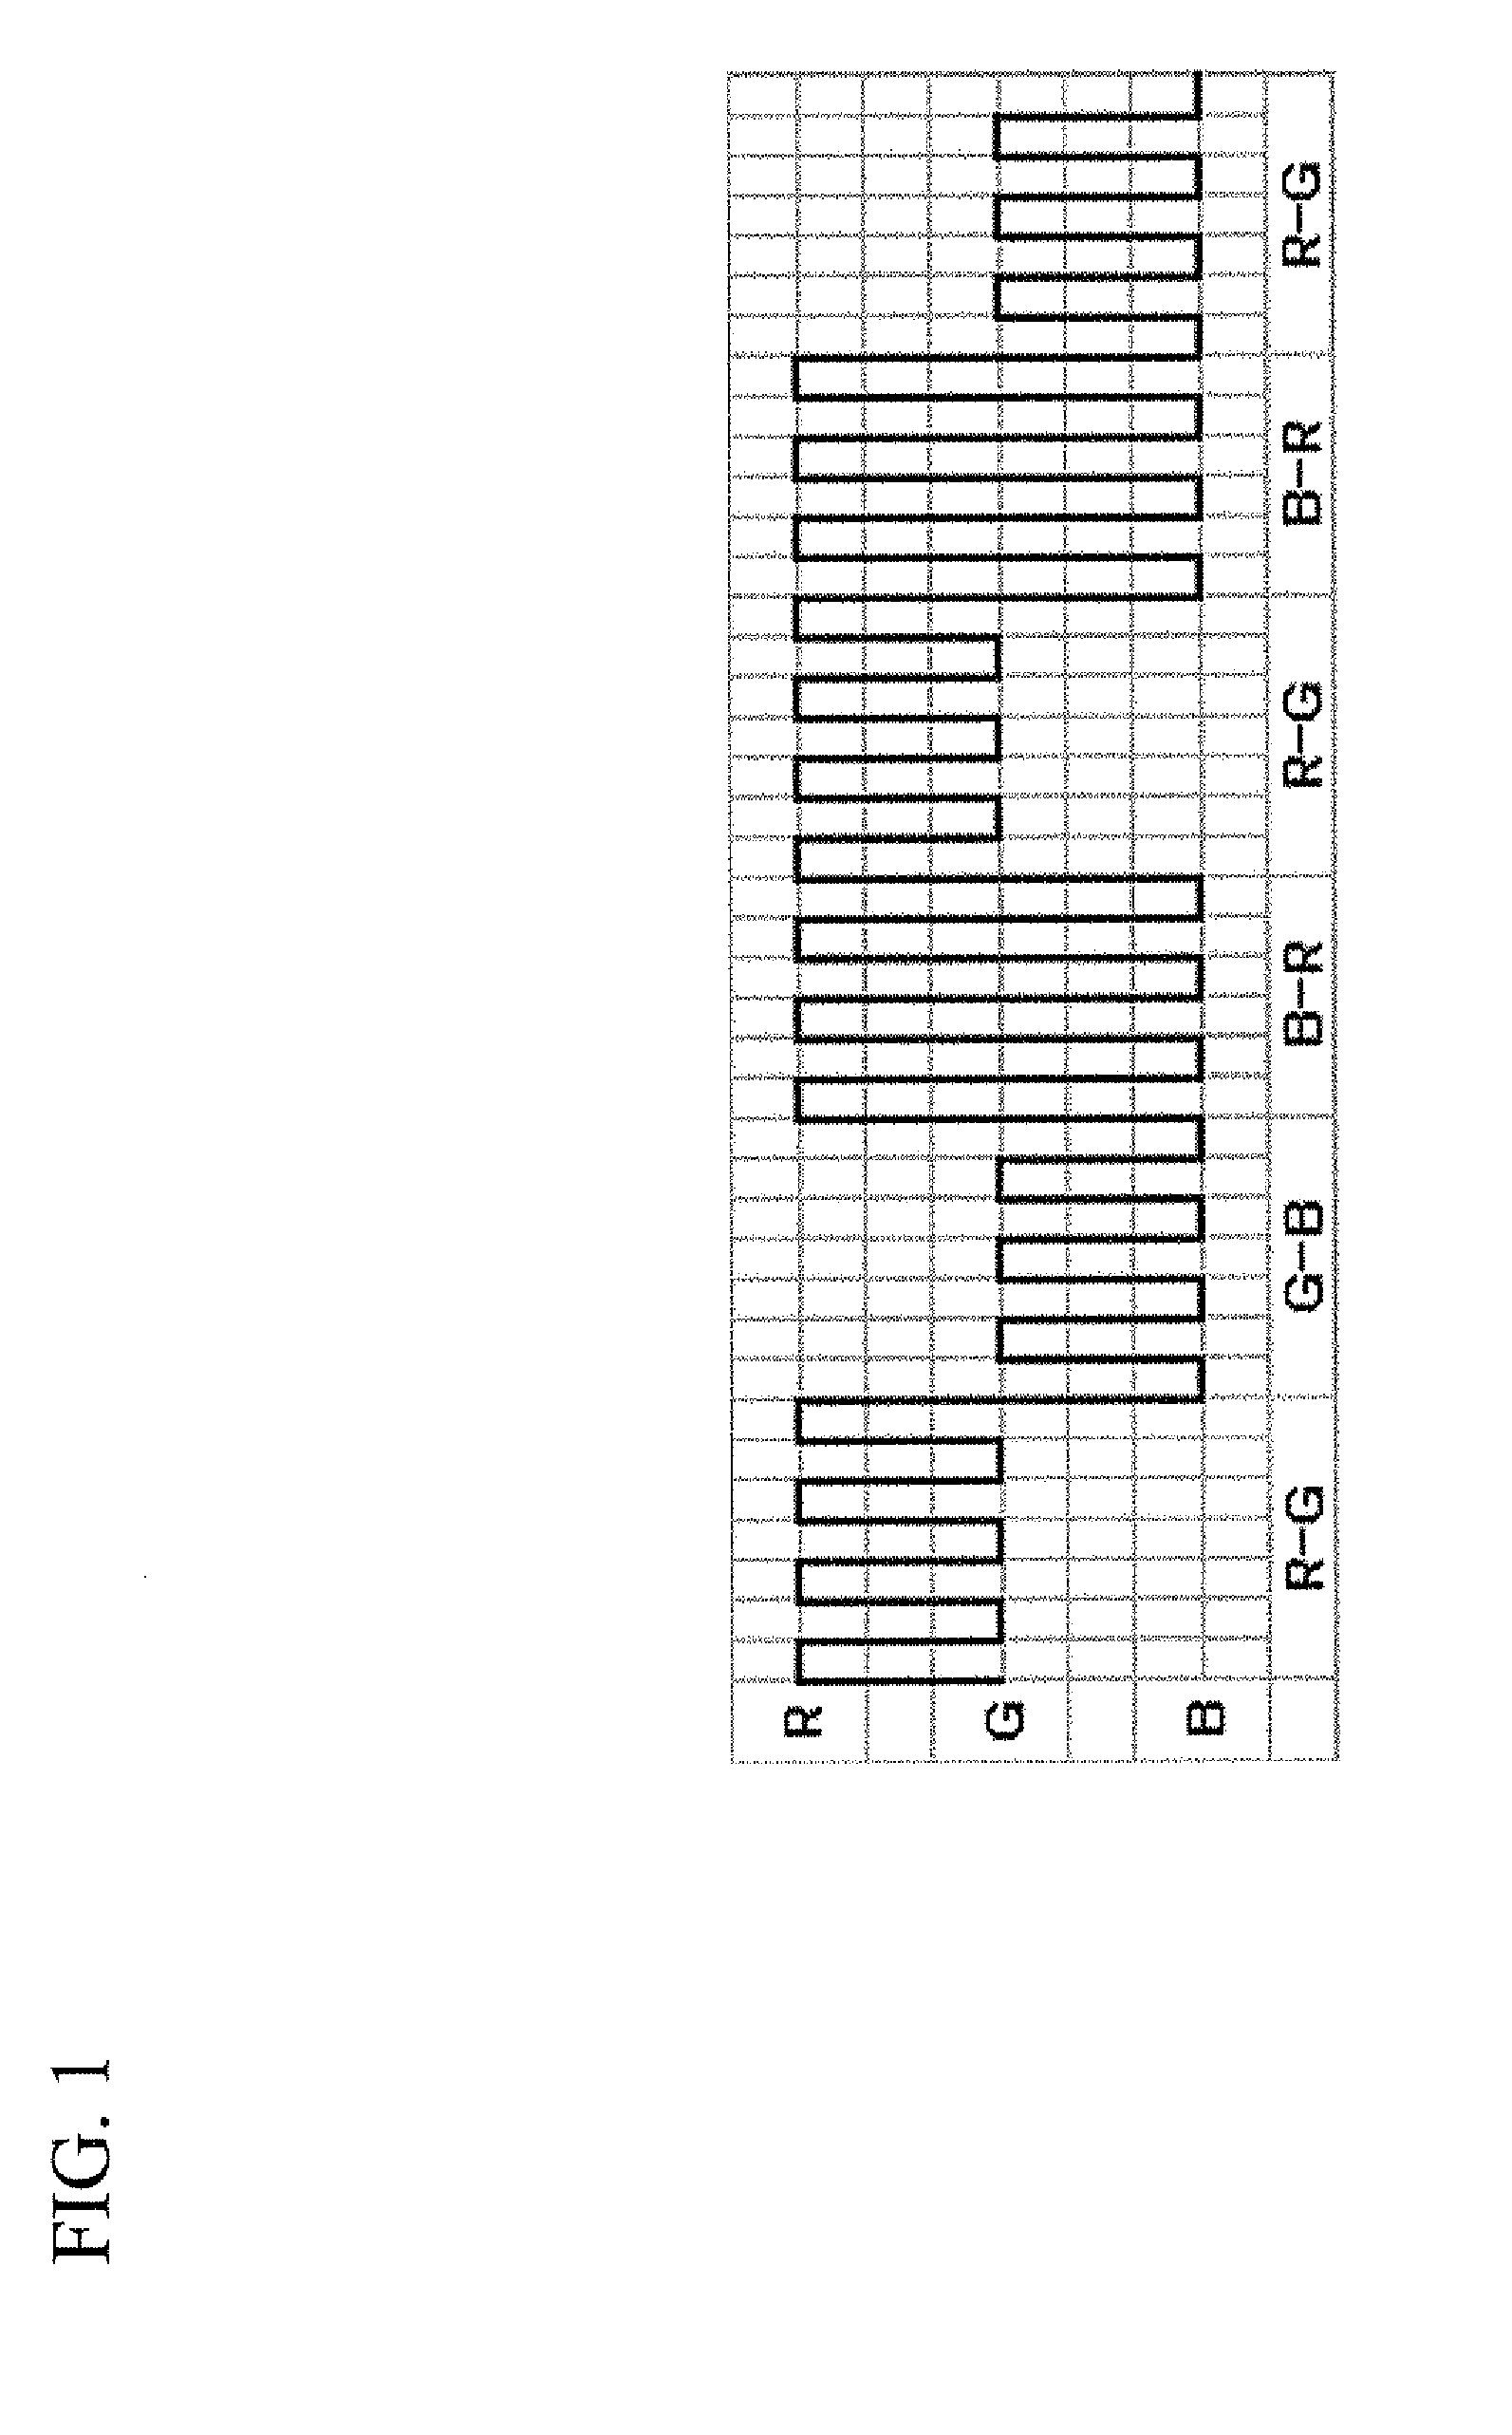 Light emitting device and method for tracking object